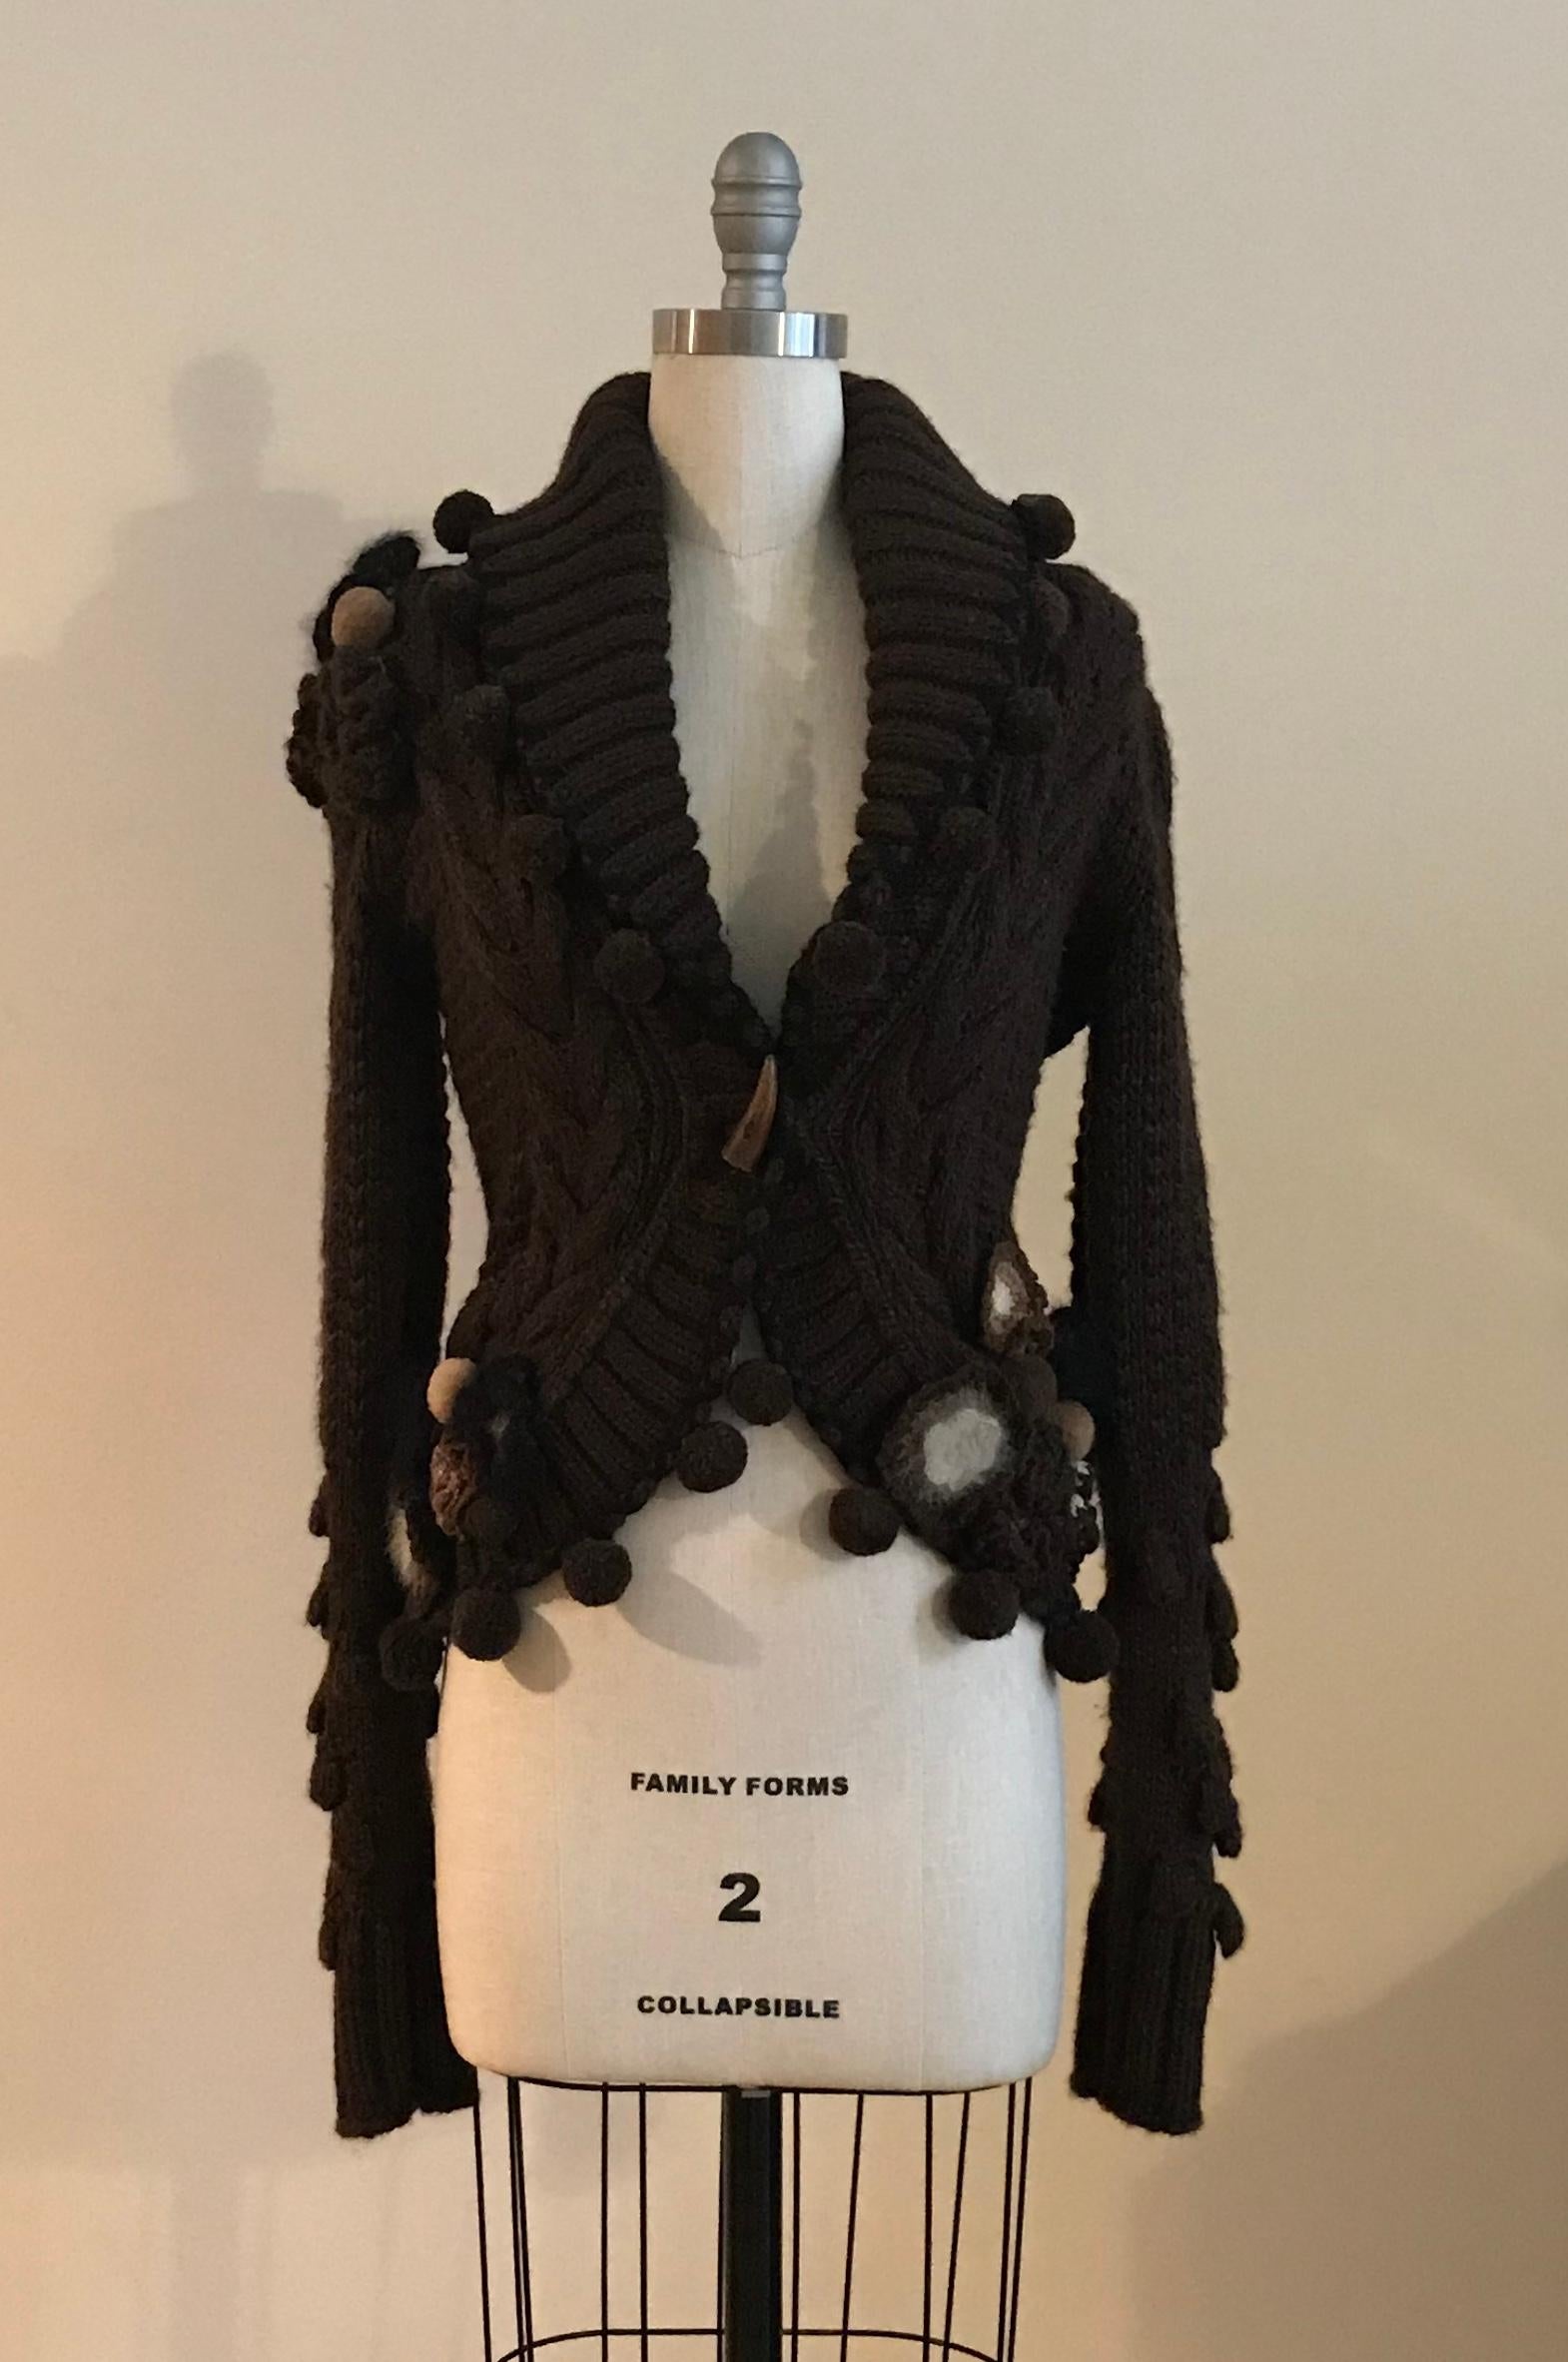 Alexander McQueen chunky brown knit cardigan style sweater with pom pom detail as seen in his Fall 2005 runway presentation, The Man Who Knew too much, based on the Hitchcock film, Marilyn Monroe, and Tippi Hedren (look 12.) Sweater features an